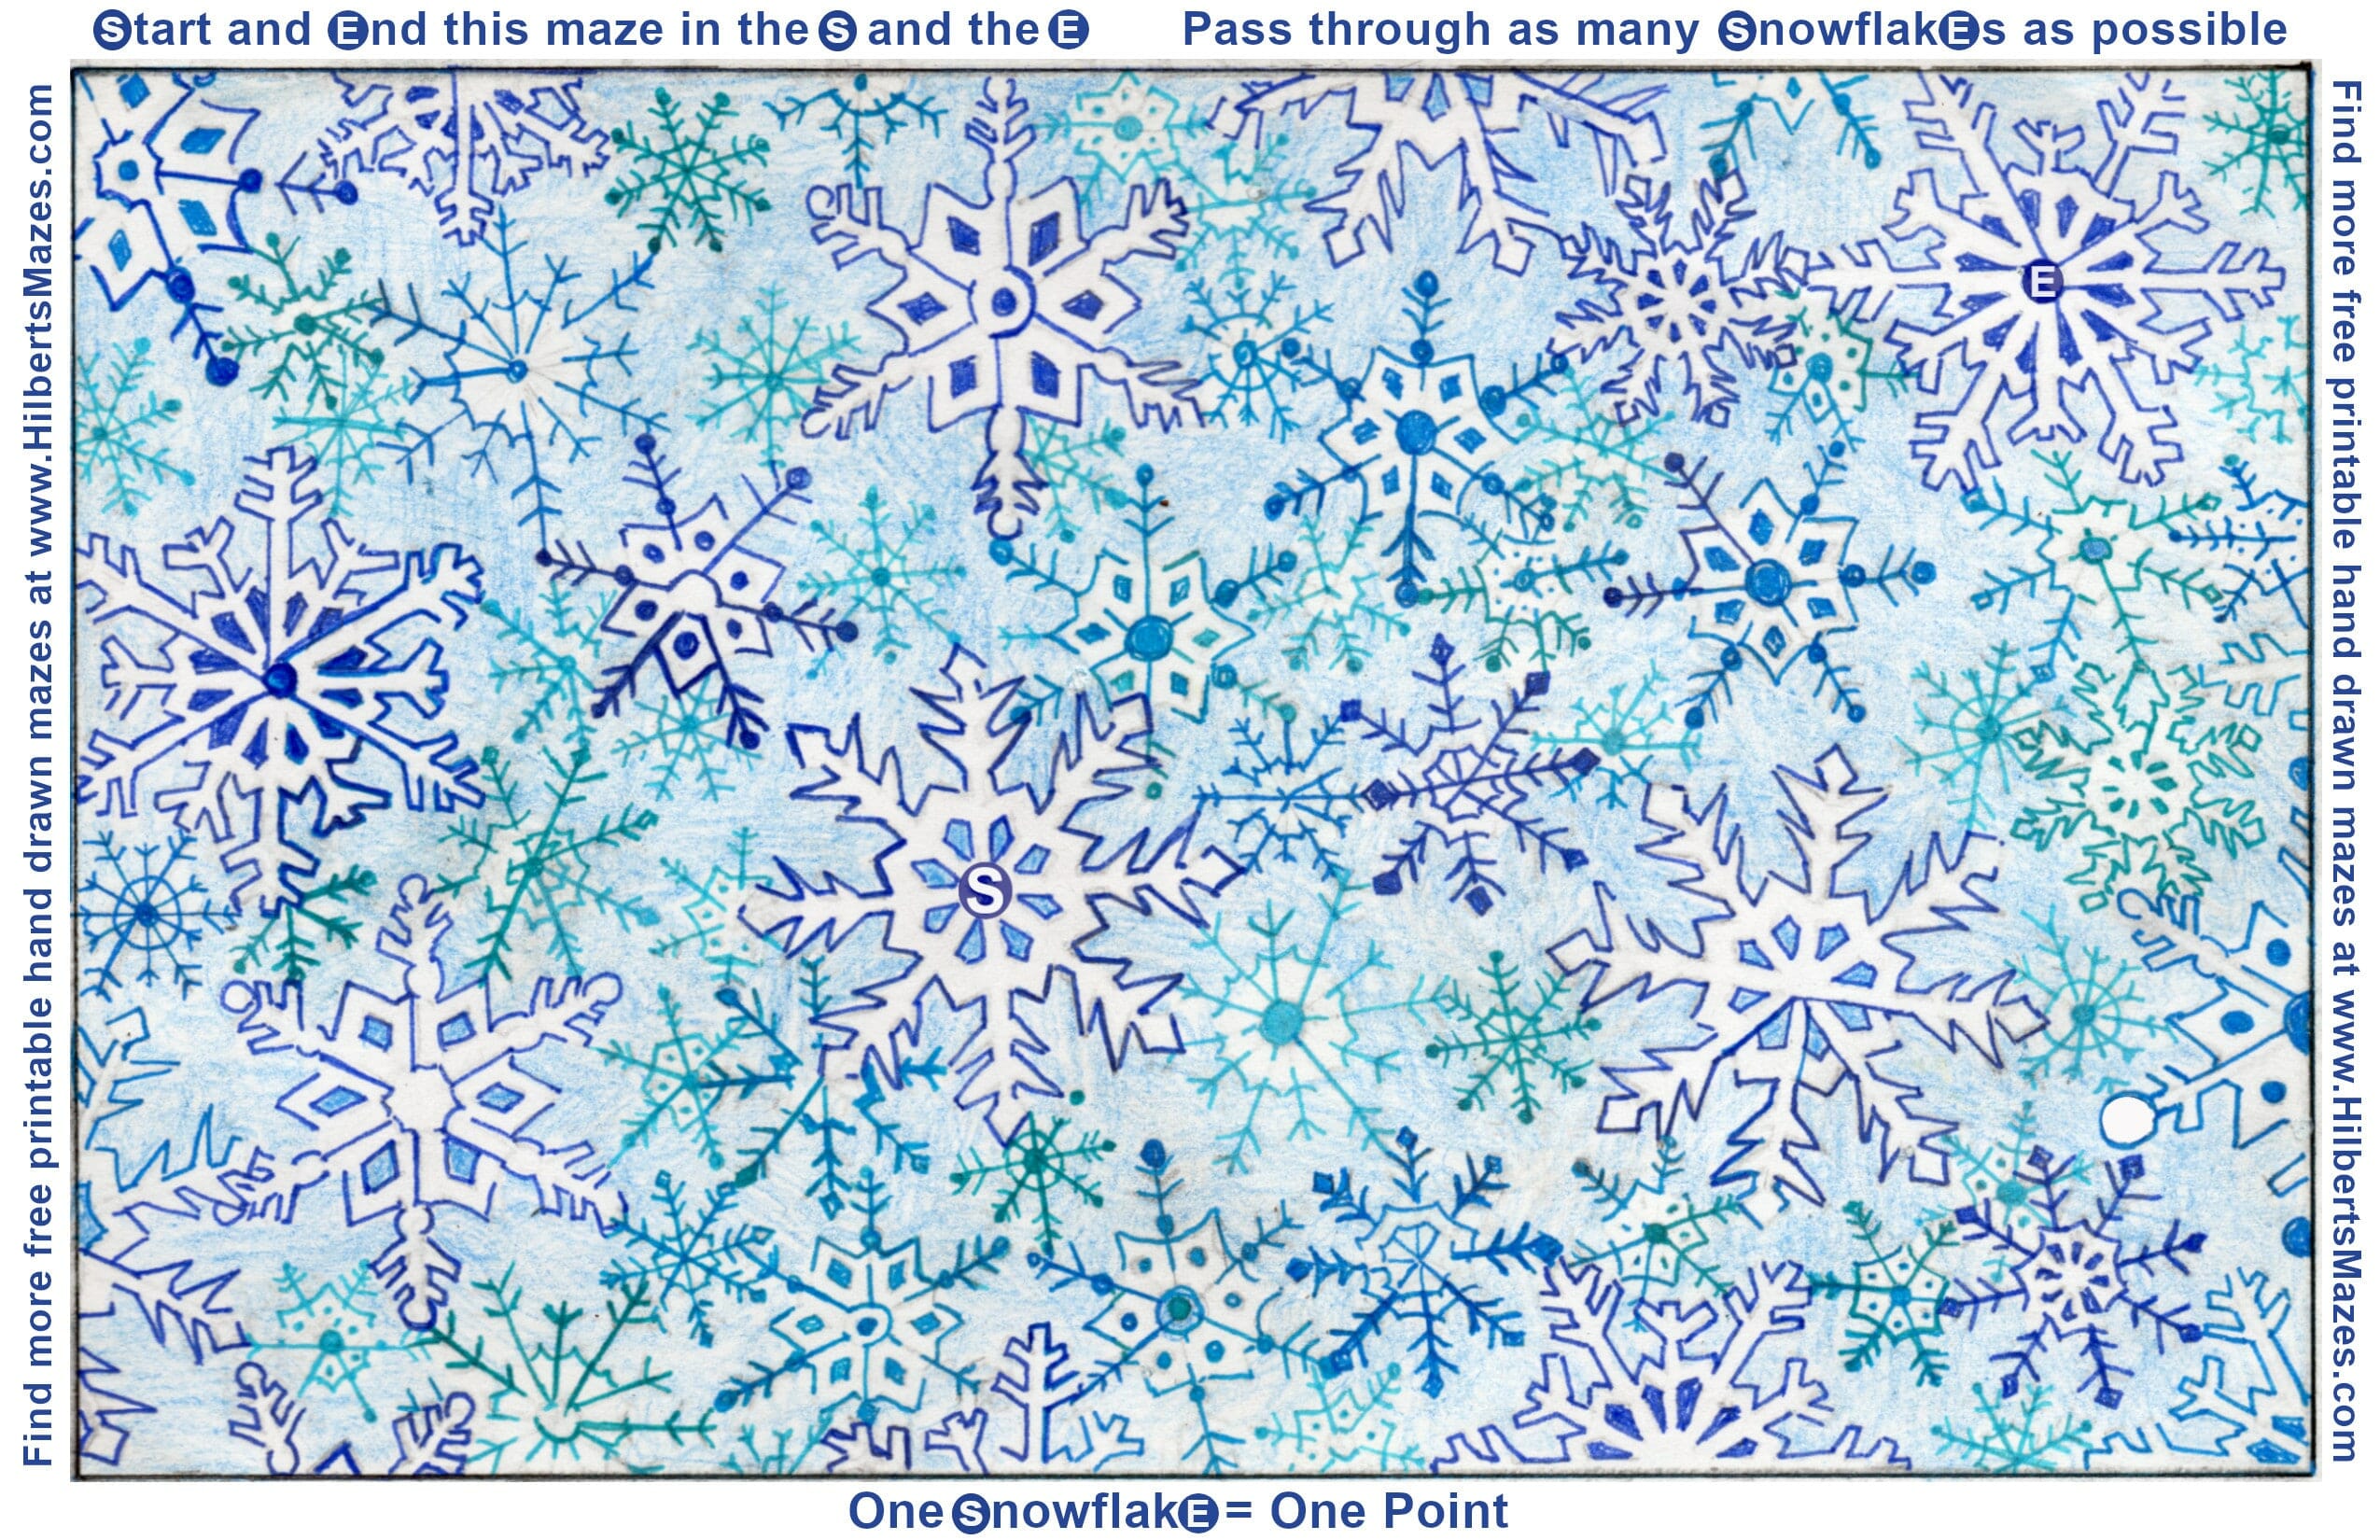 Free Printable Hand Drawn Snowflake Maze. Easily downloadable and printable PDF format. Great Mazes for both kids & adults very challenging but fun.